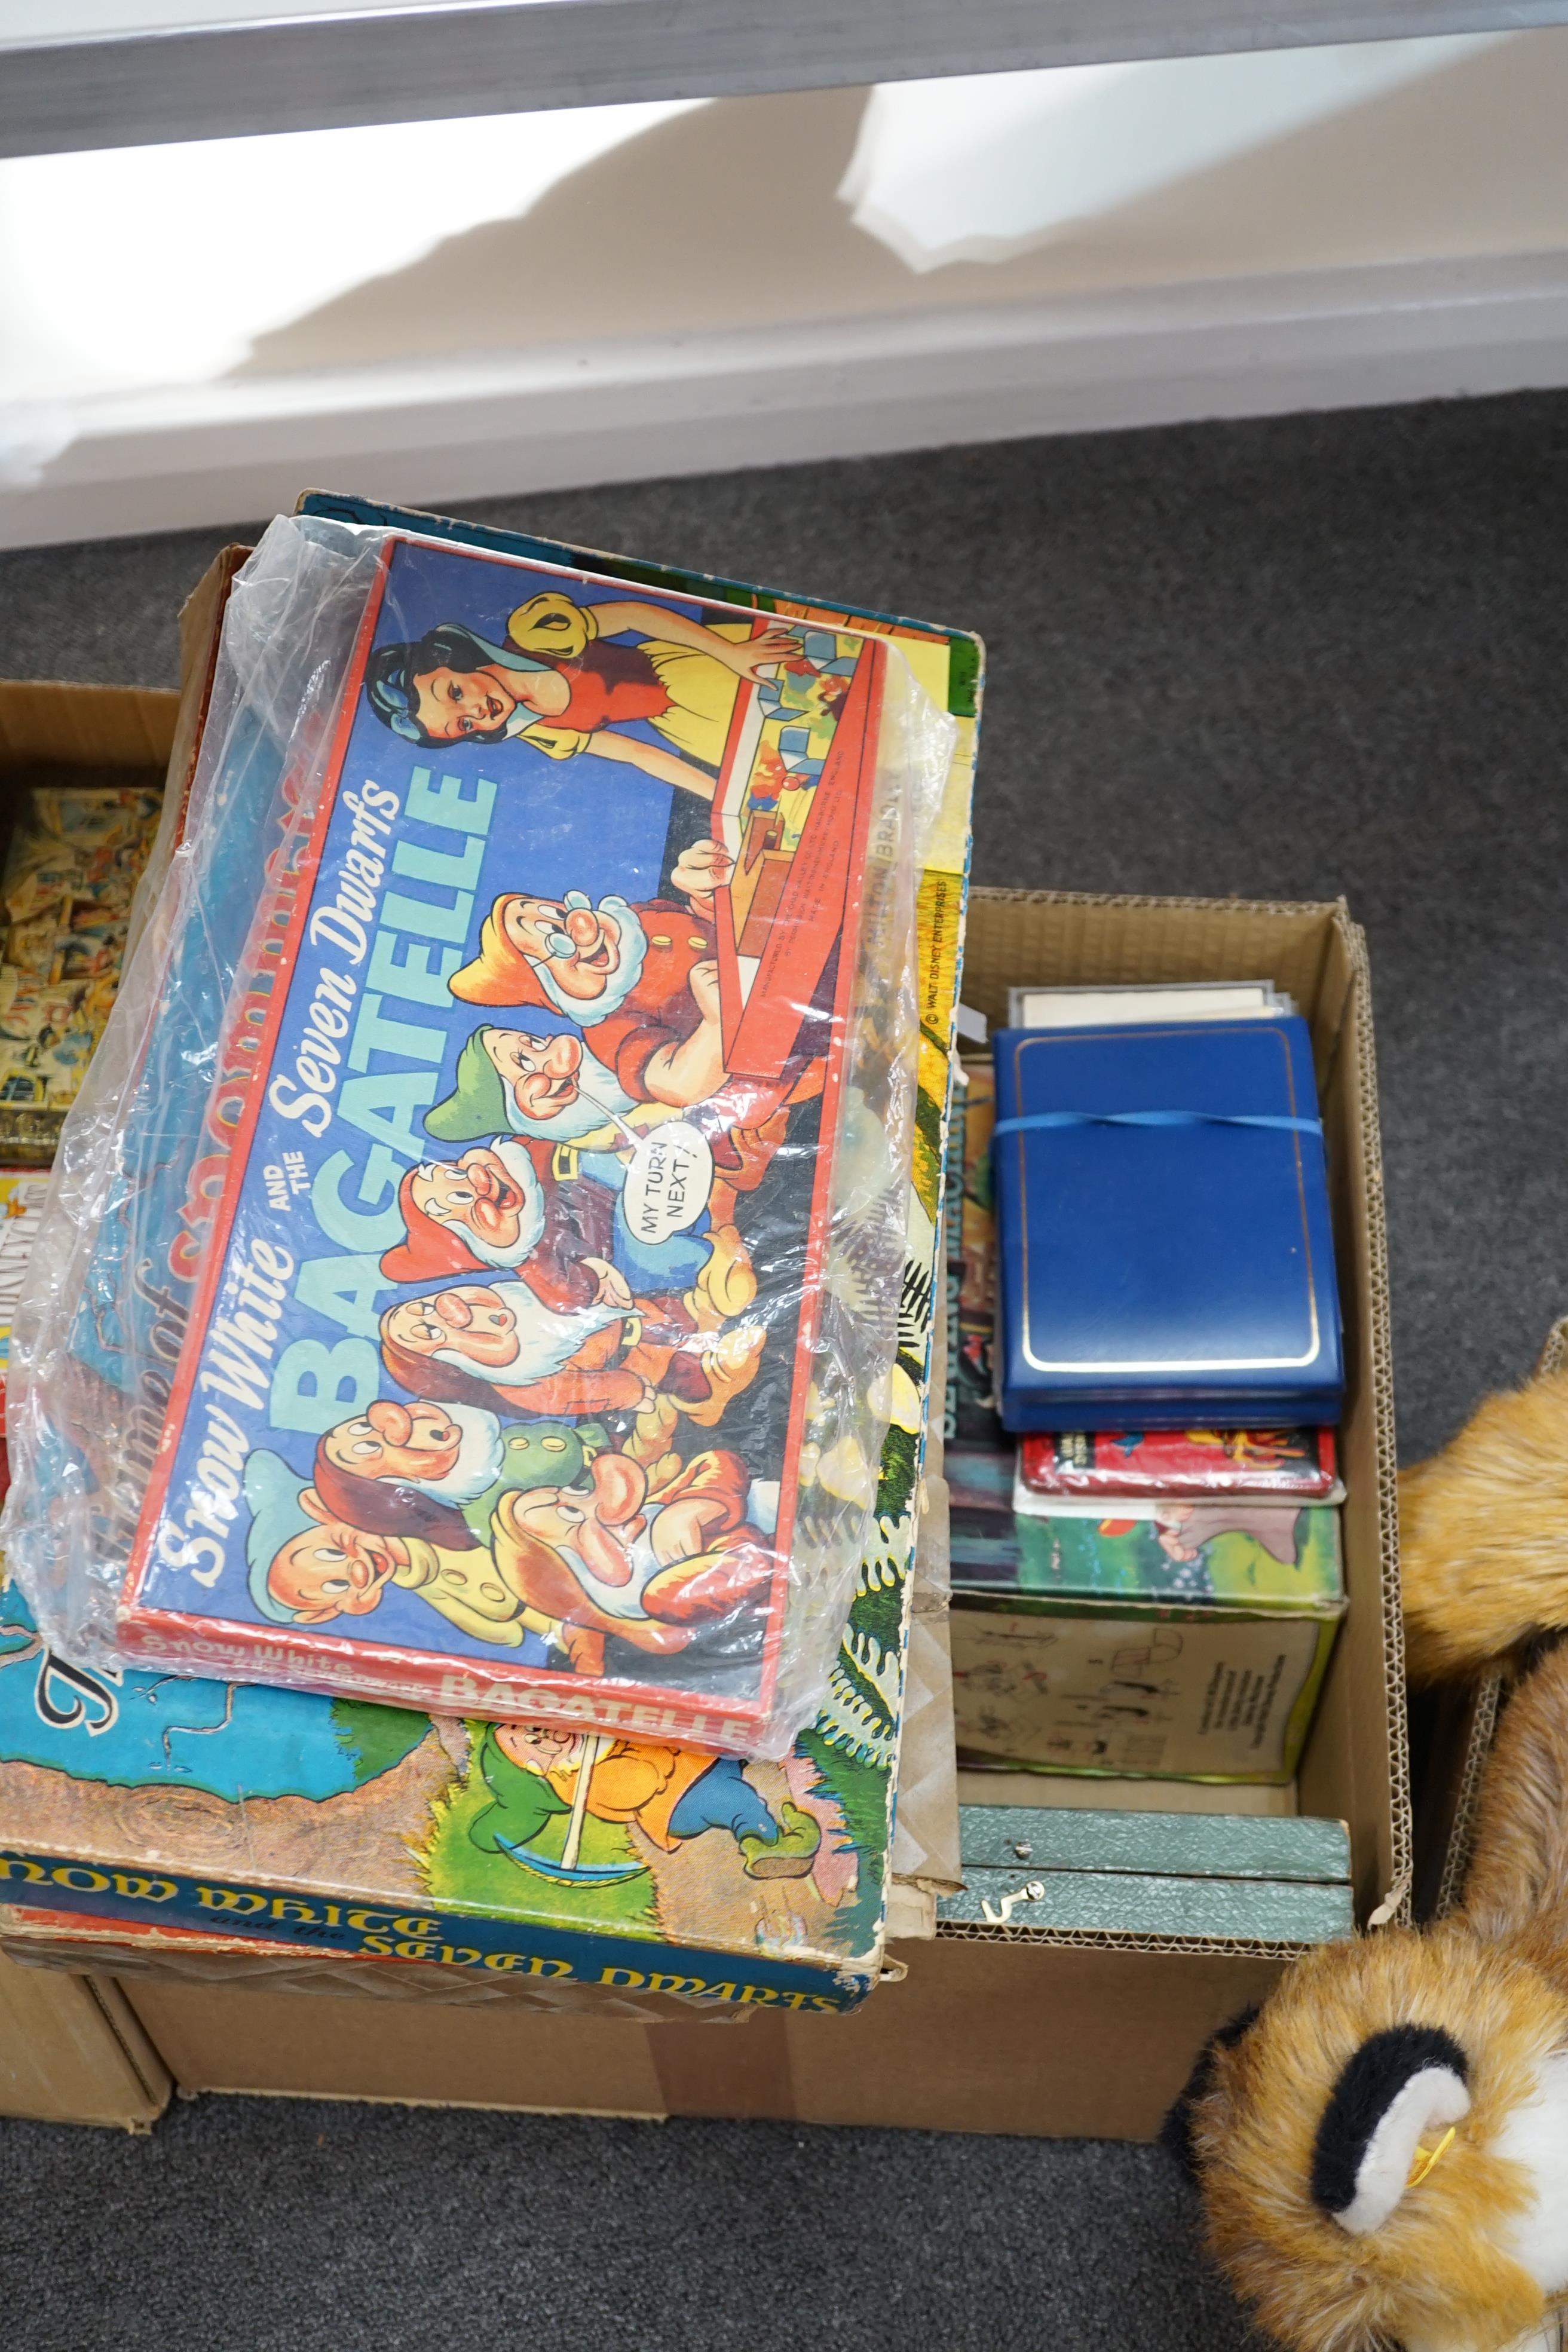 A collection of Disney Snow White memorabilia including; board games, a bagatelle board, jigsaw puzzles, The Seven Dwarfs Shooting Game, a Snow White sewing machine, ‘snap-apart’ soap, cake frills, handkerchiefs, books,